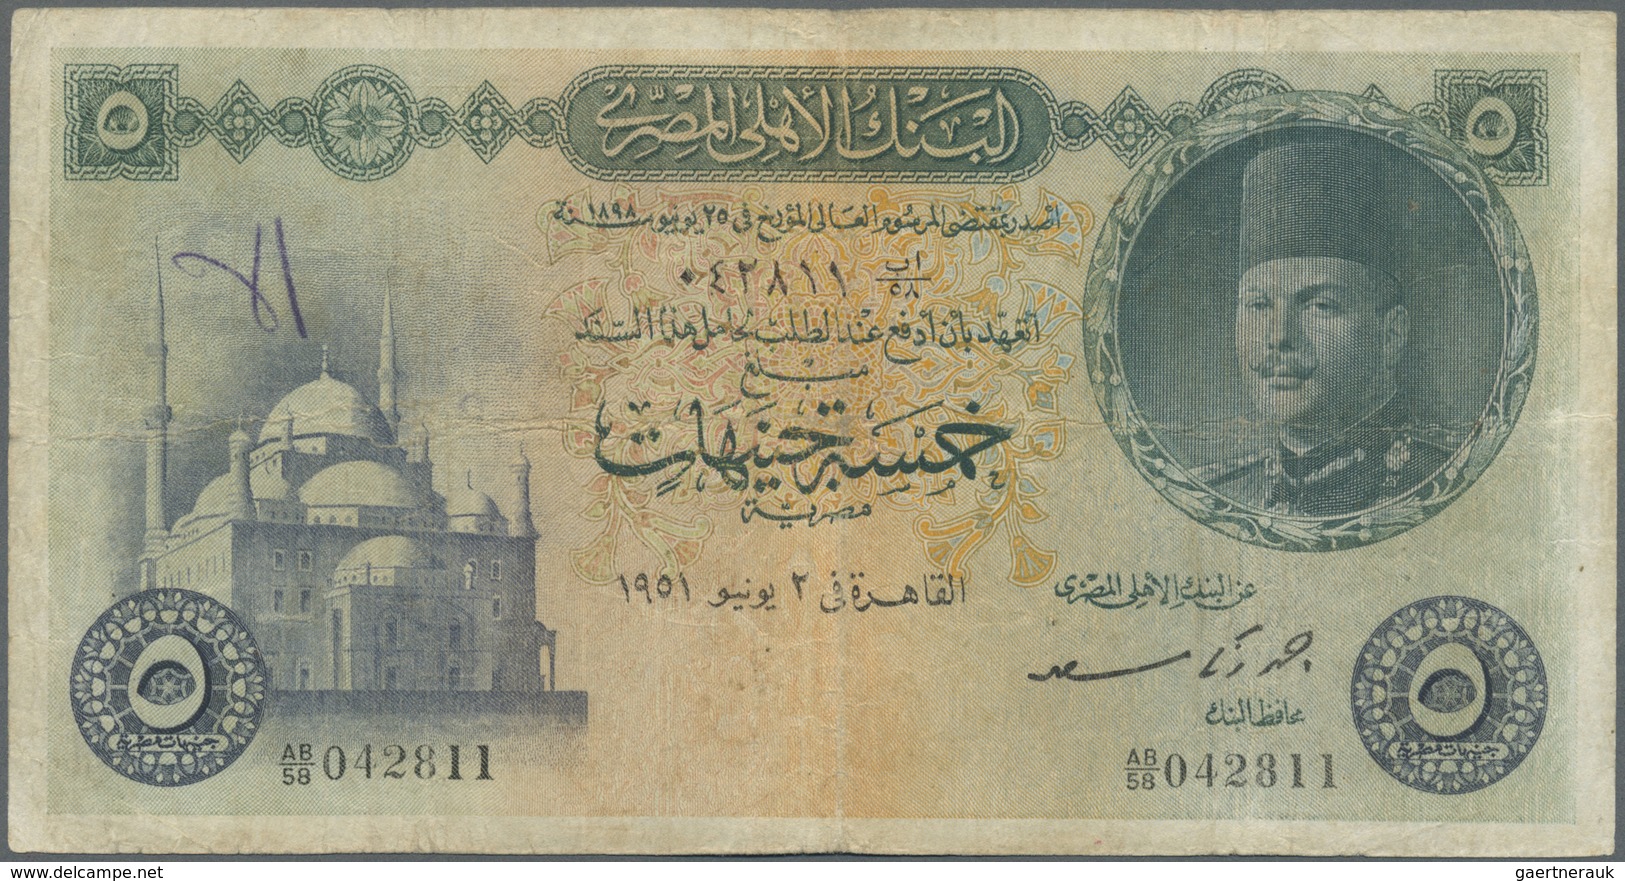 Egypt / Ägypten: 5 Pounds 1951 P. 25 In Used Conditin With Folds And Creases, Stained Paper, No Hole - Aegypten